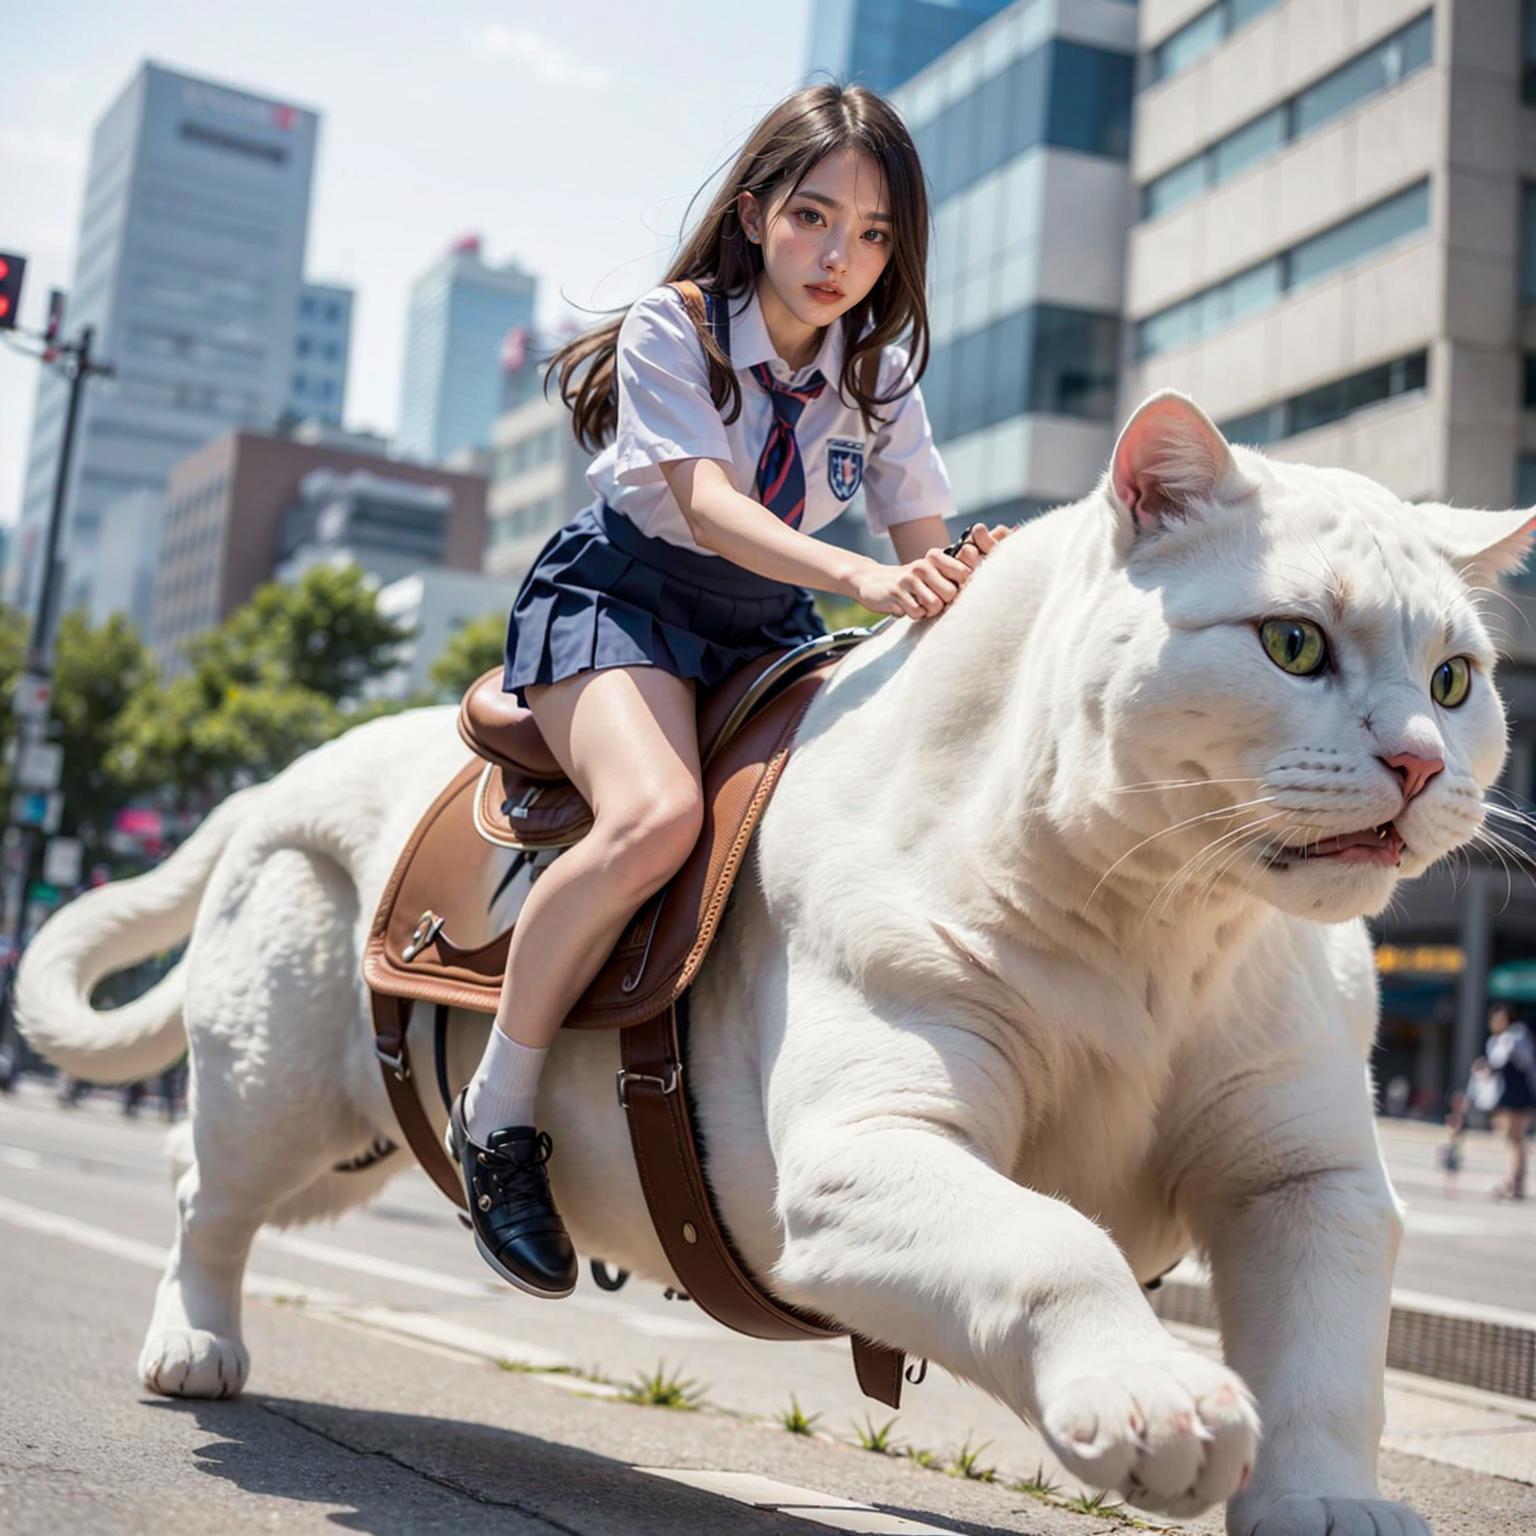 A little girl riding a white cat-like animal, which appears to be a giant stuffed toy. The girl is wearing a white shirt and a tie, and she is riding the toy cat on a city street.